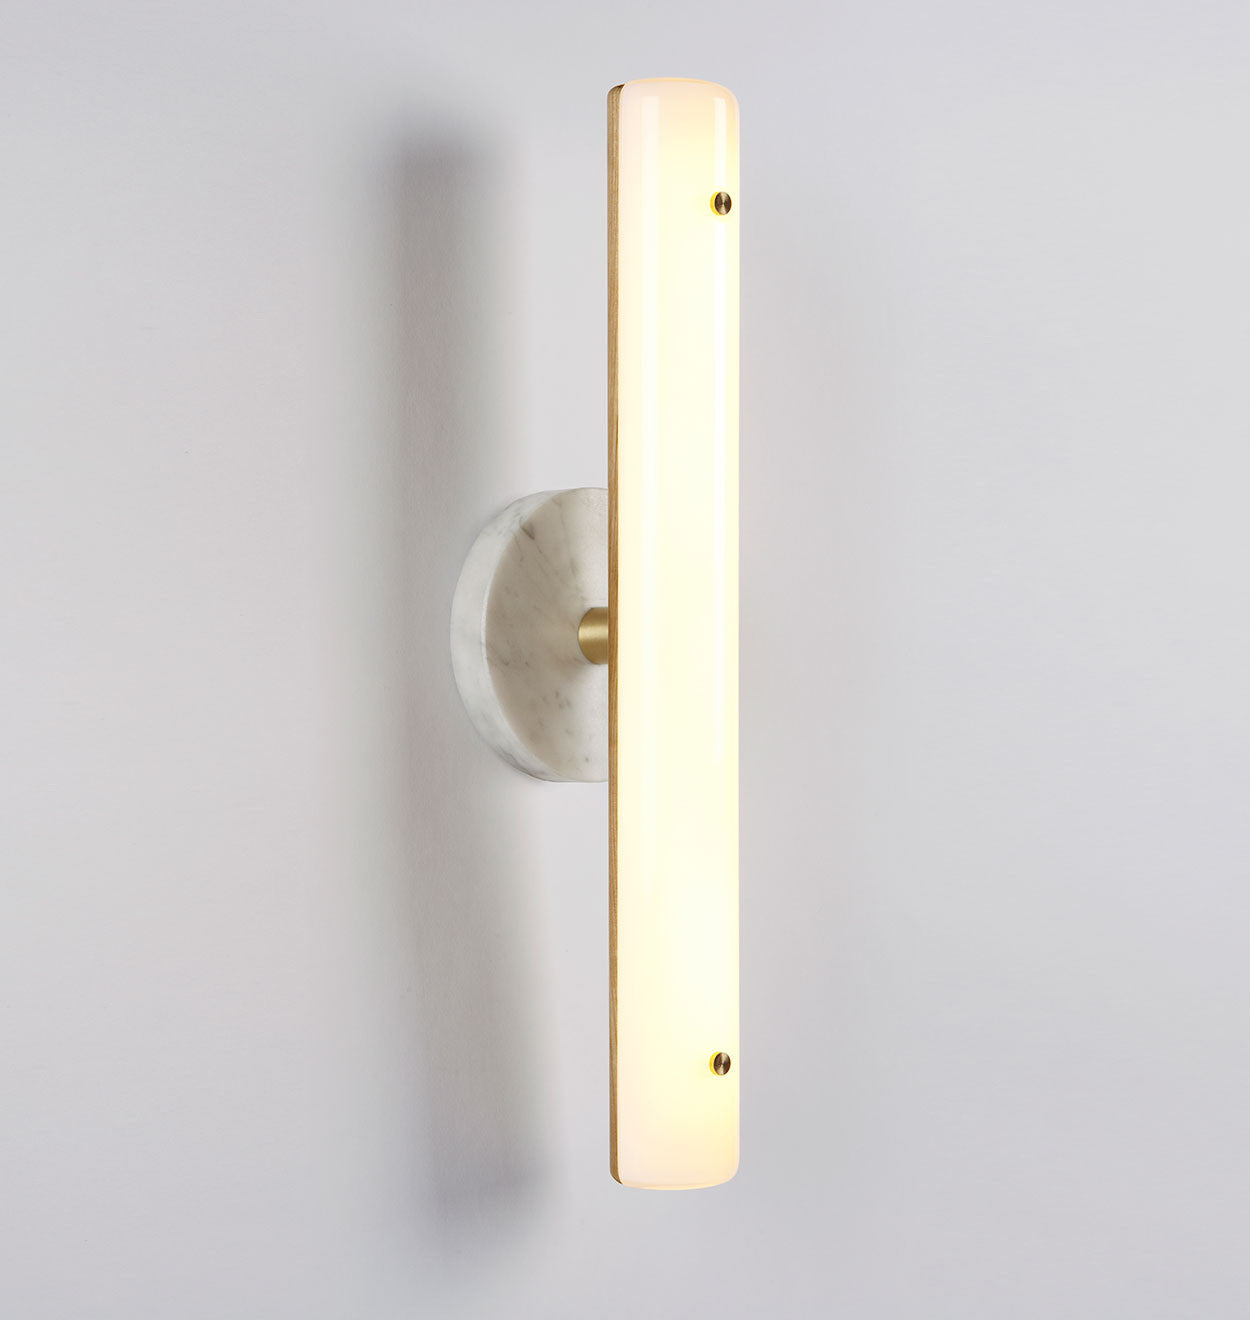 Counterweight Sconce